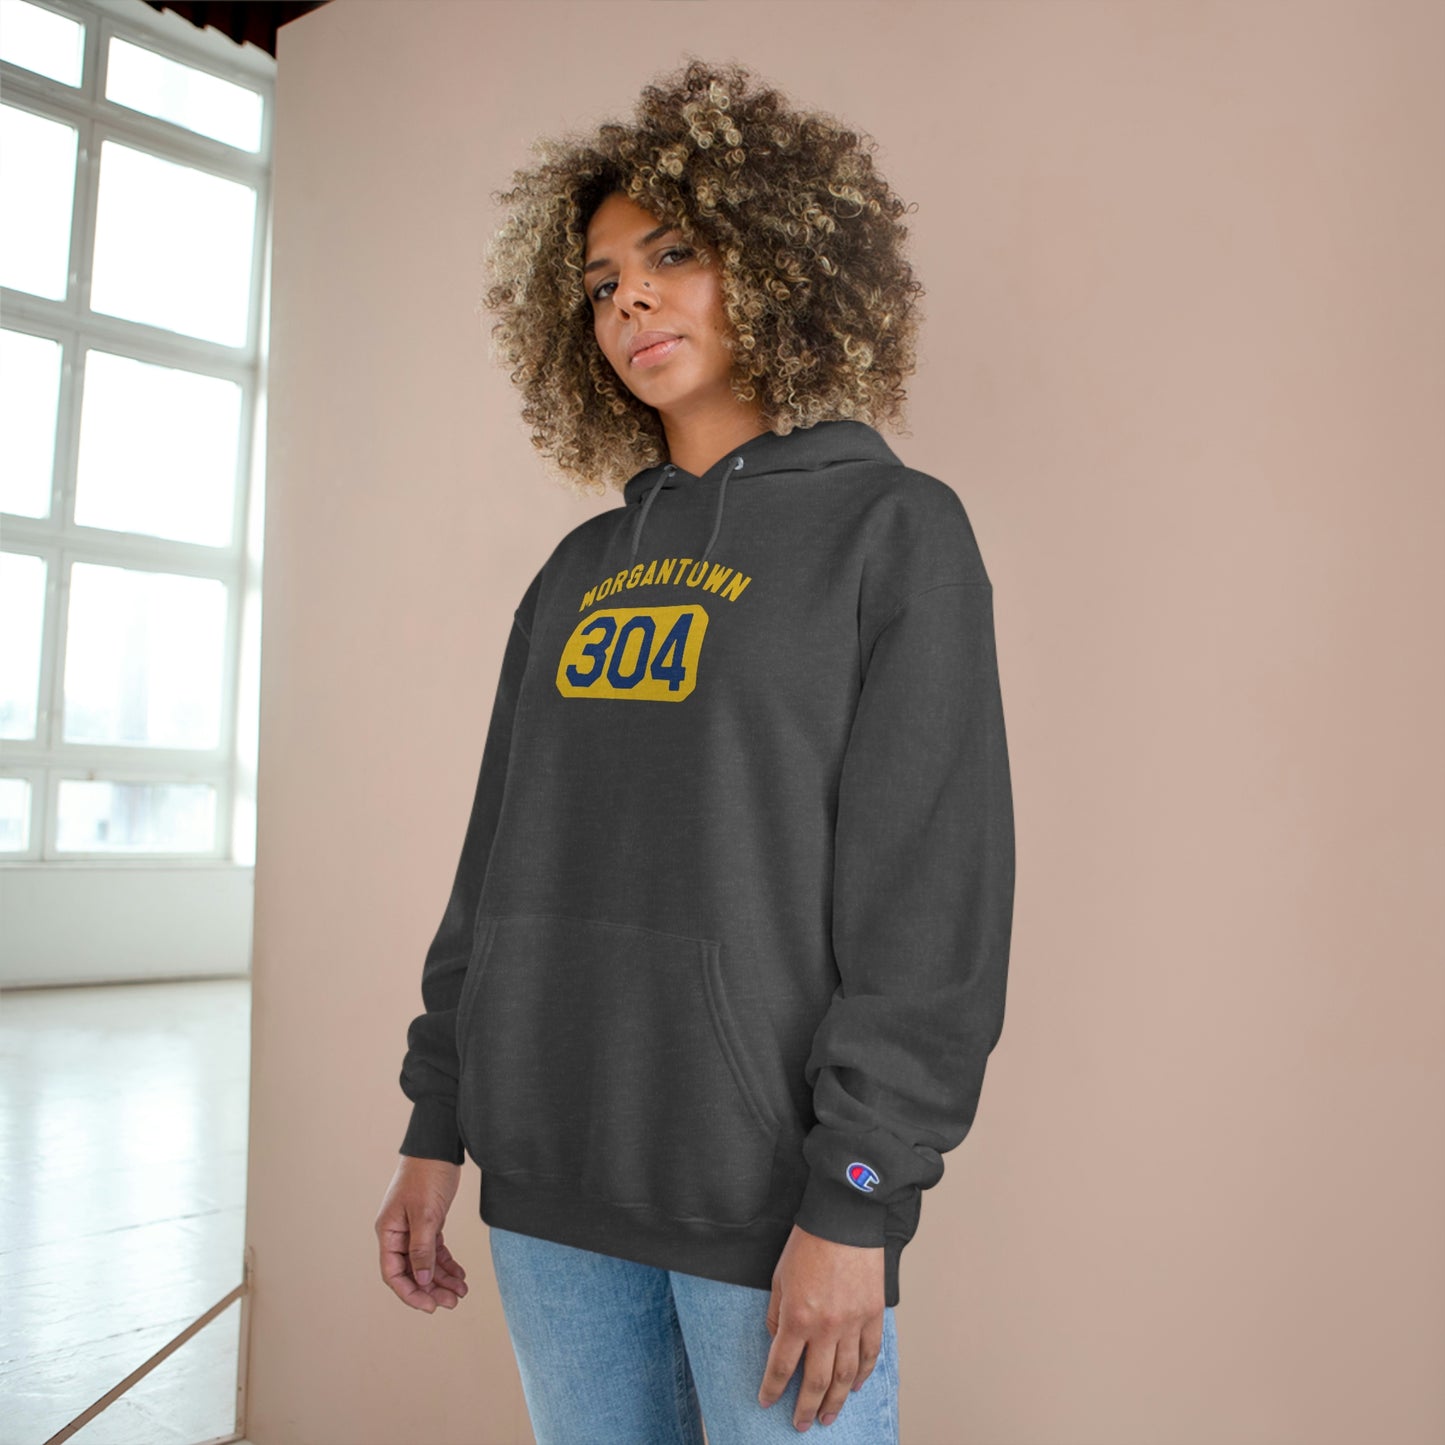 MORGANTOWN arched_304-Champion Hoodie